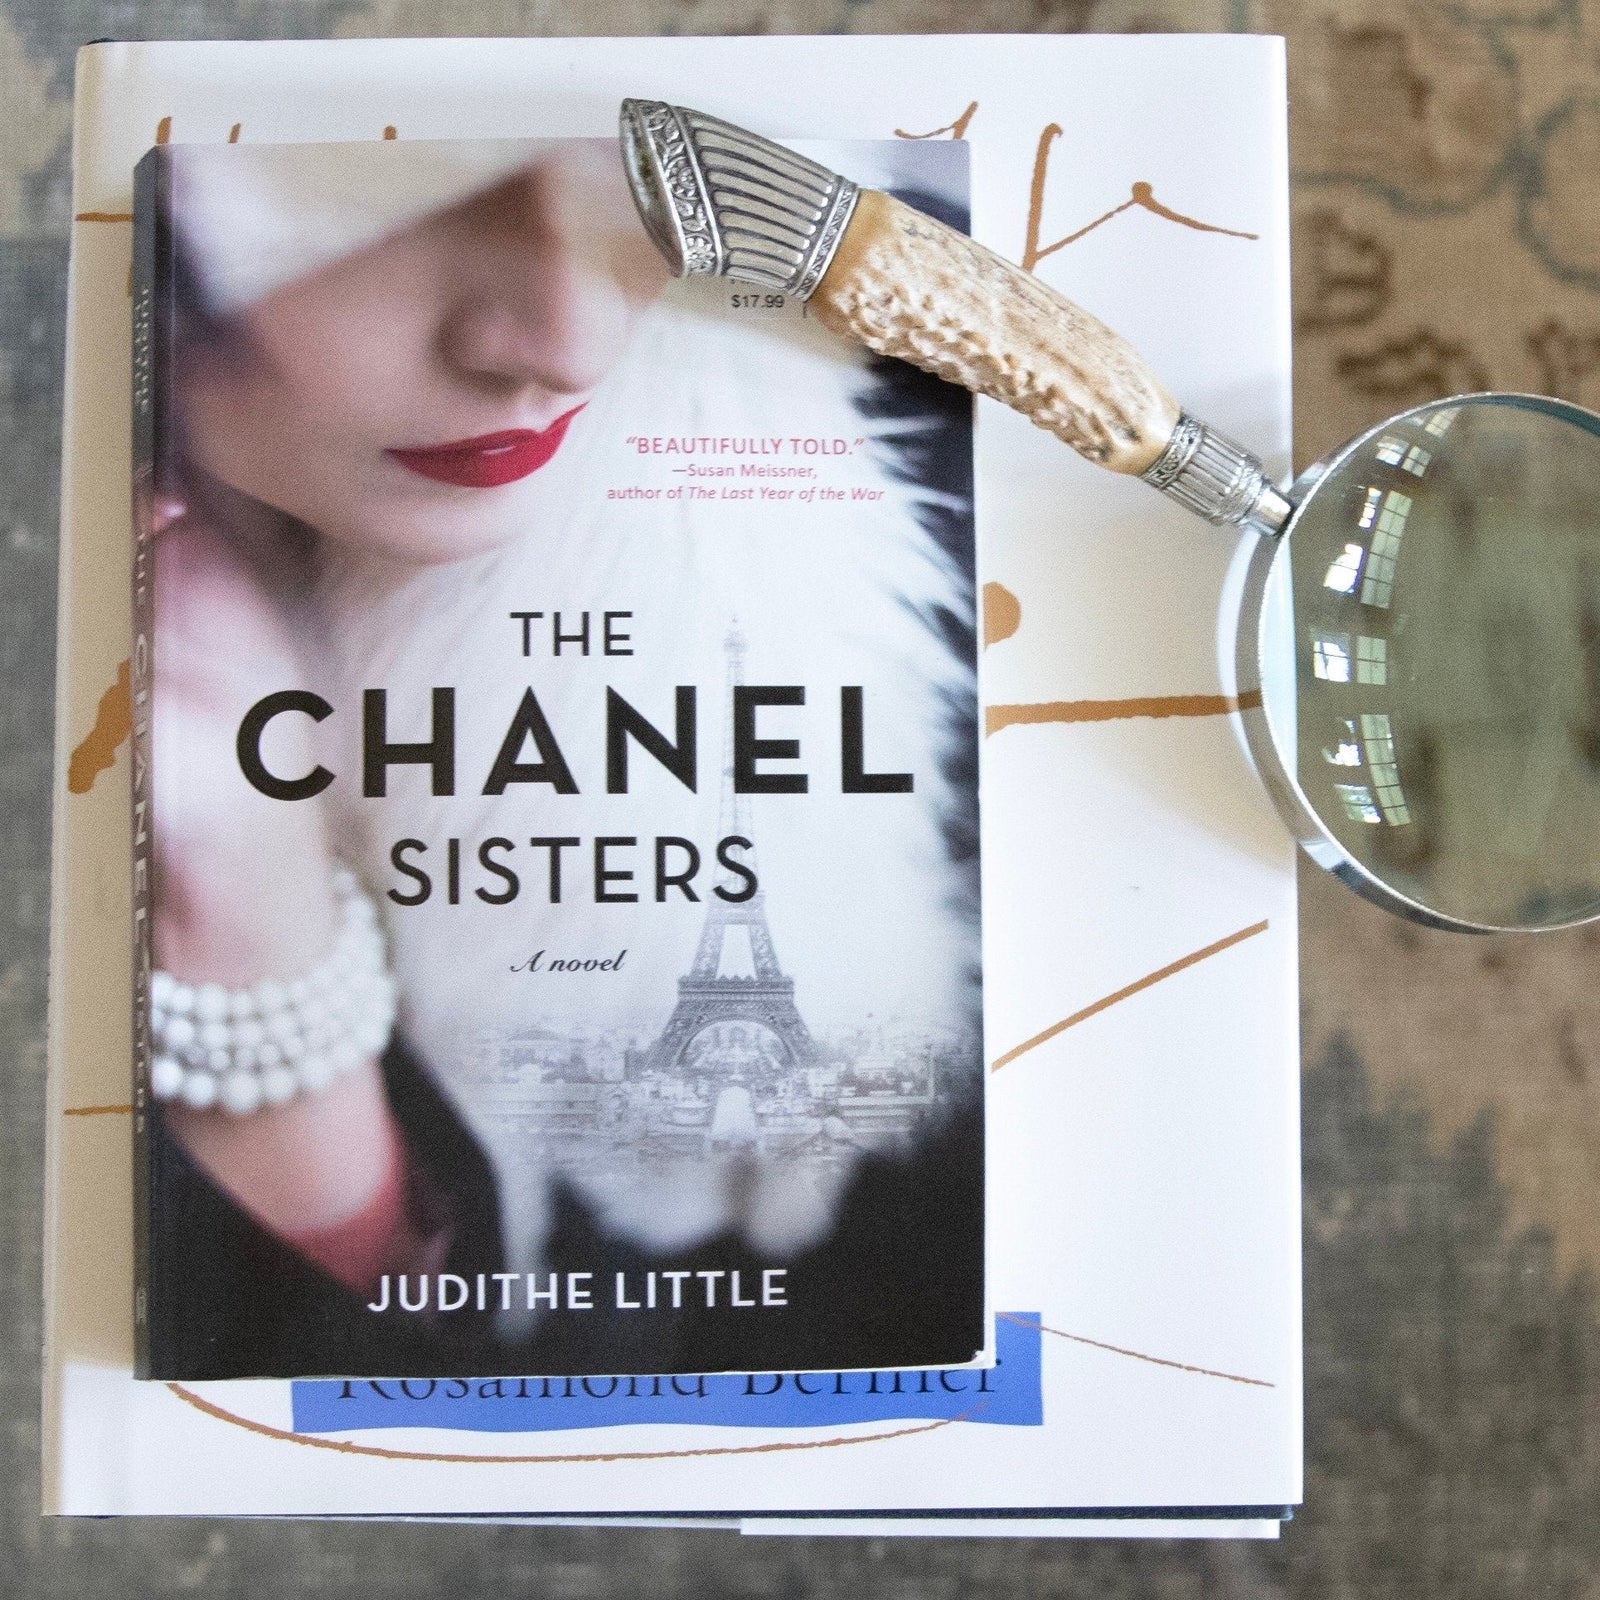 The Chanel Sisters by Judithe Little - Audiobook 